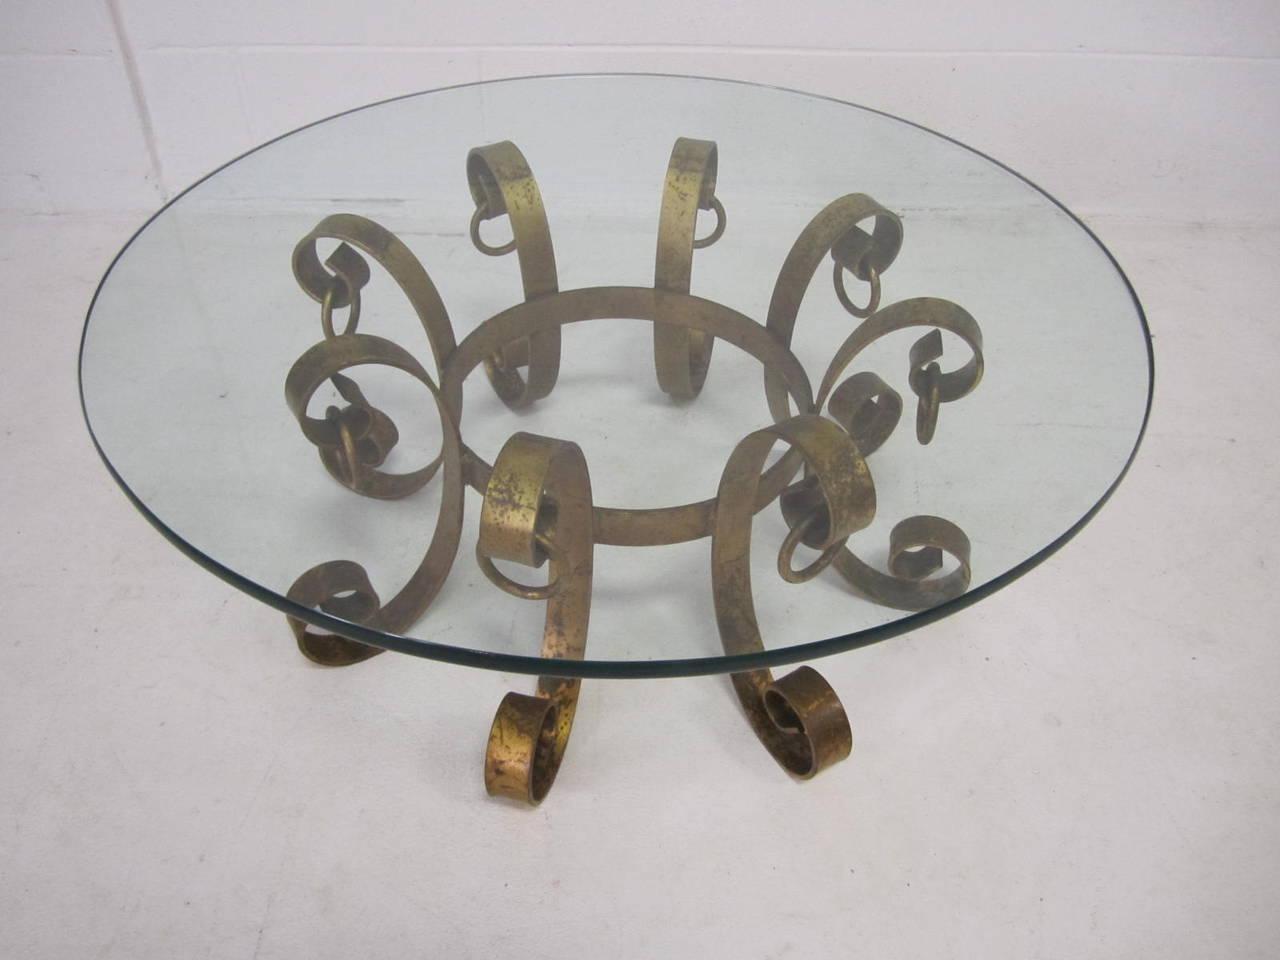 Stunning Gilded iron scroll coffee table. This piece has  has a wonderful distressed gold finish and is very heavy.  The glass is very thick and looks fabulous with the sculptural iron base.